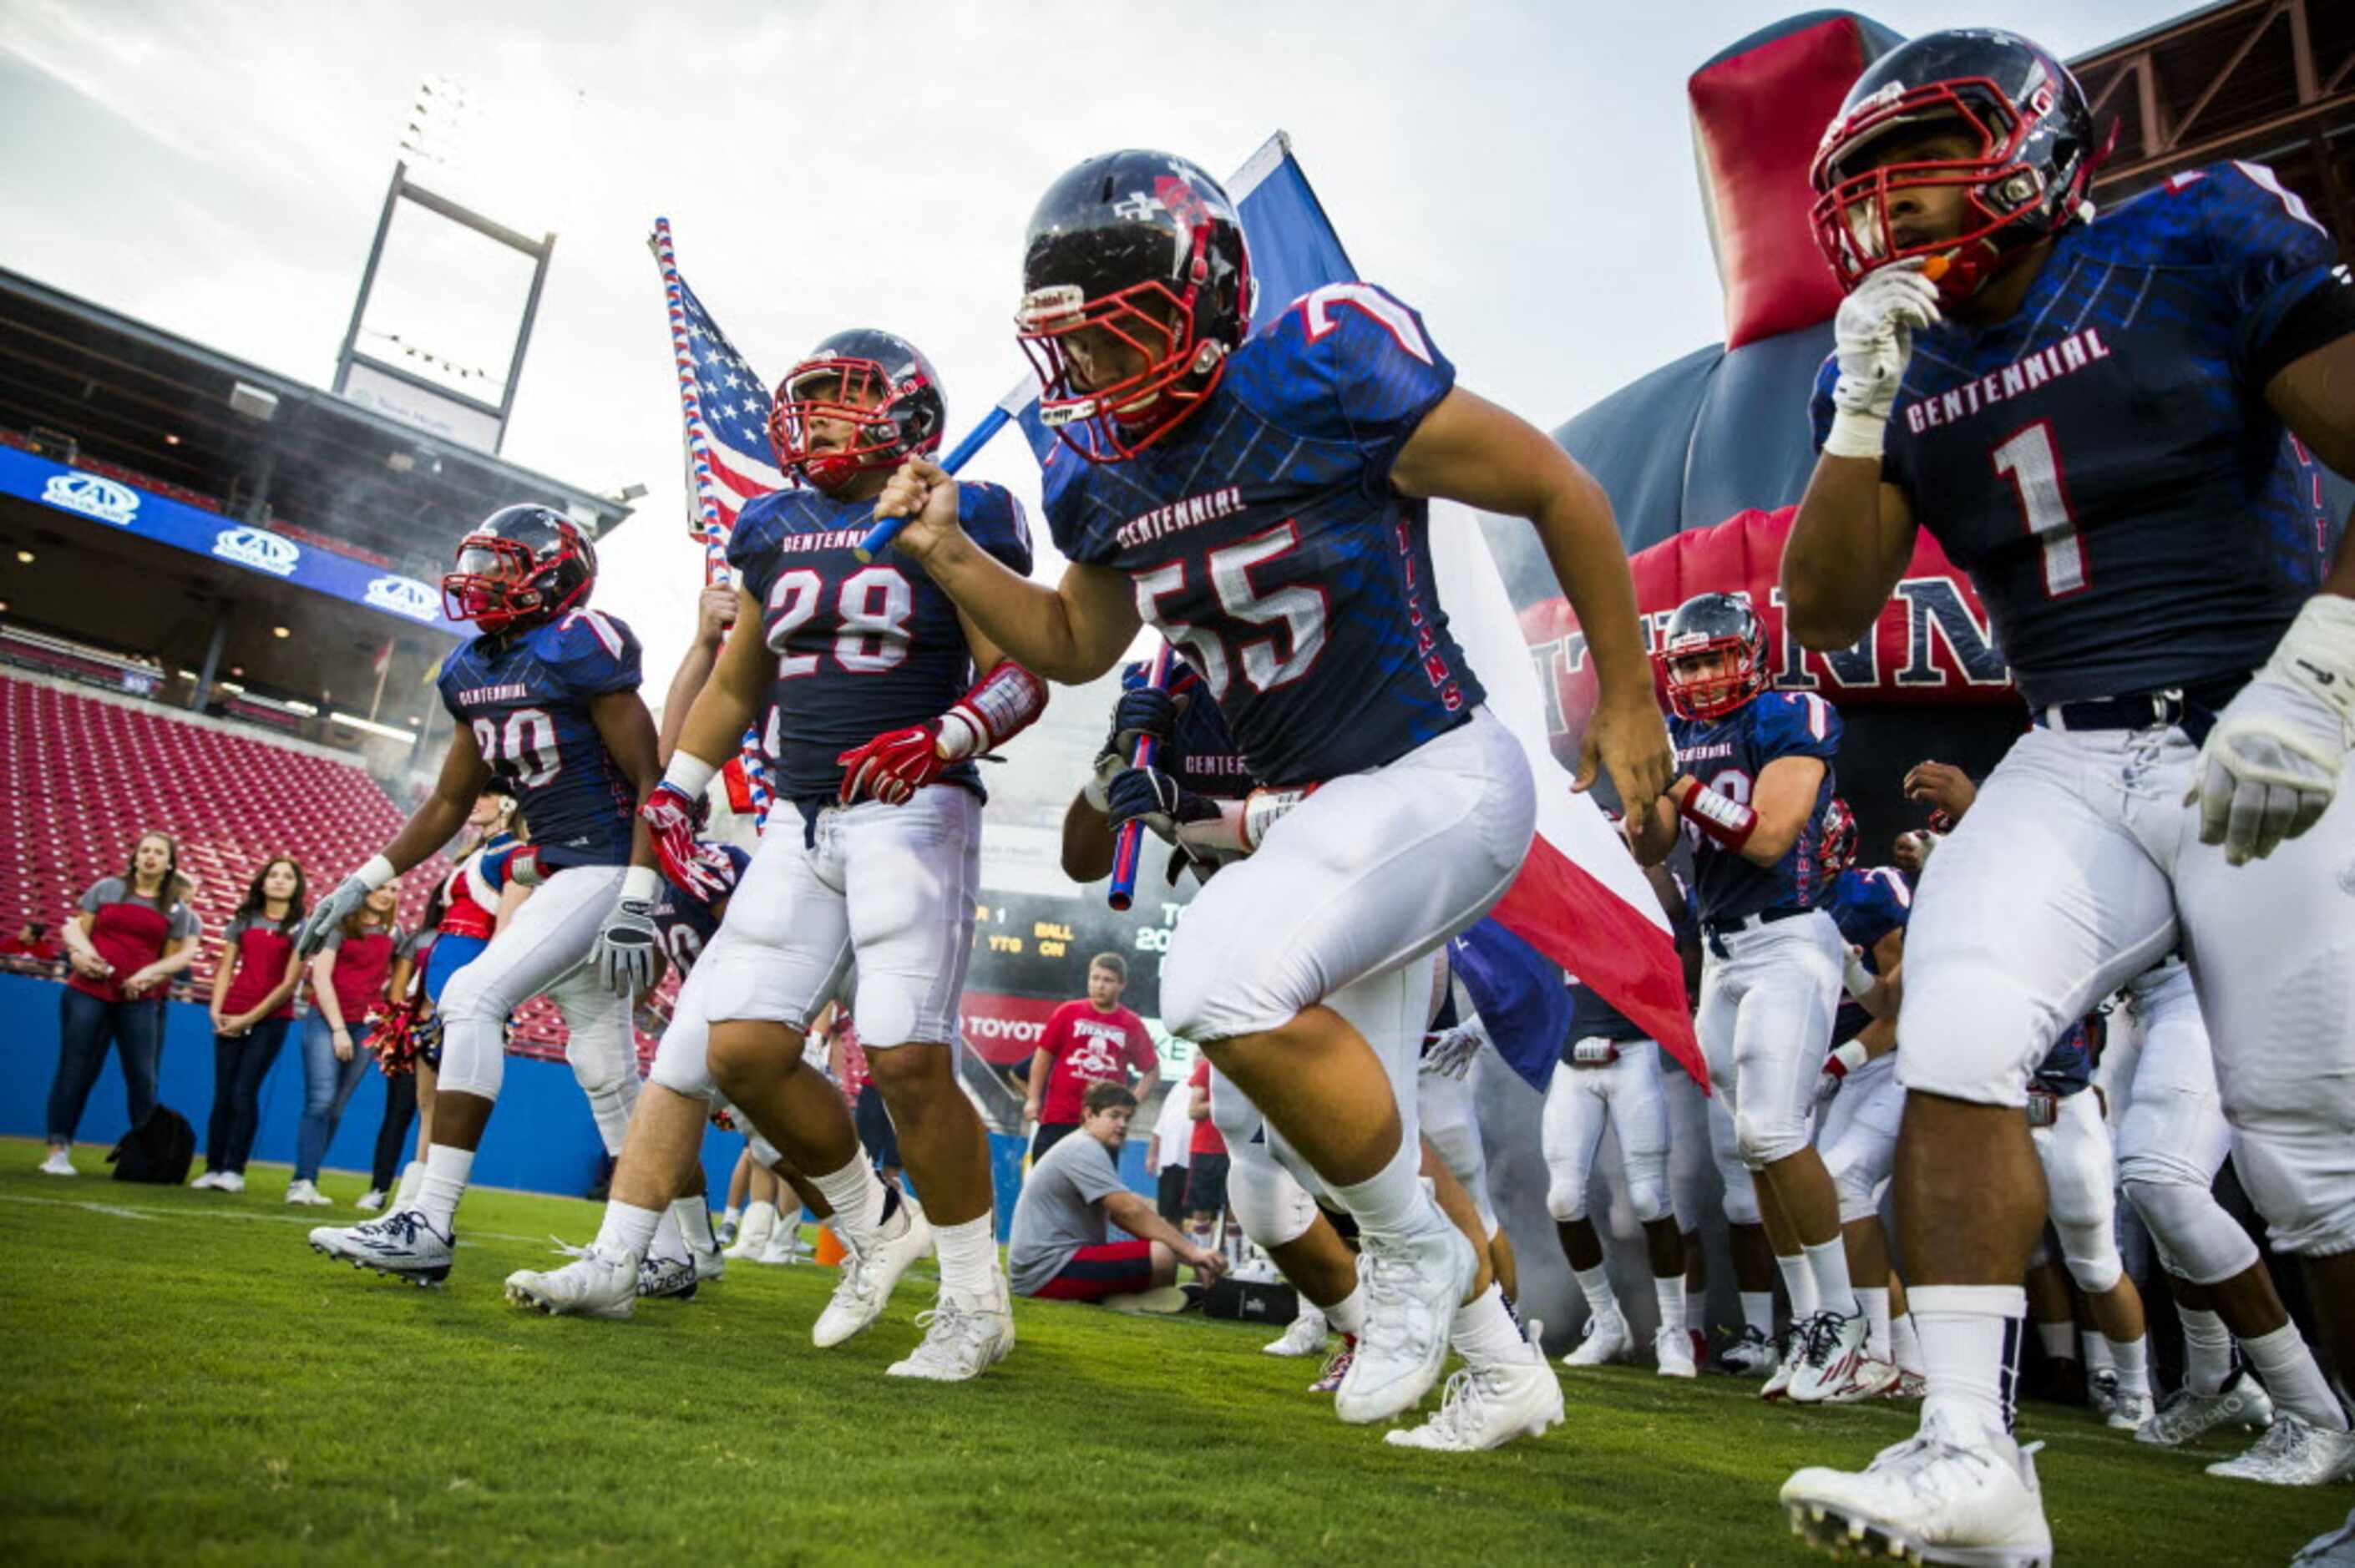 Frisco Centennial football players take the field against Frisco on Friday, September 25,...